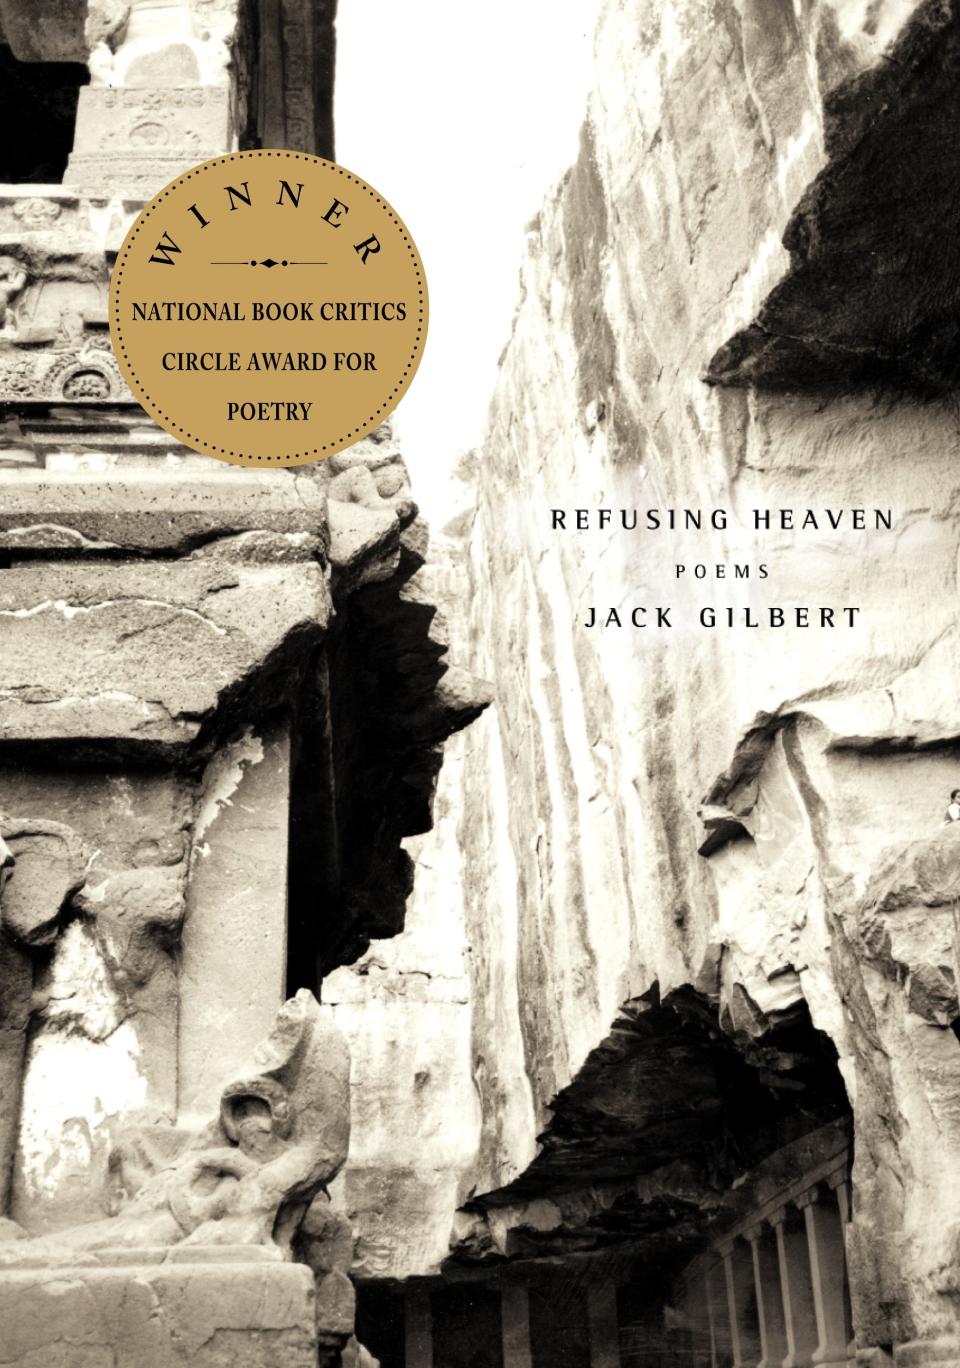 Cameron is a fan of poet Jack Gilbert, author of titles such as “The Great Fires” and “Refusing Heaven,” pictured.